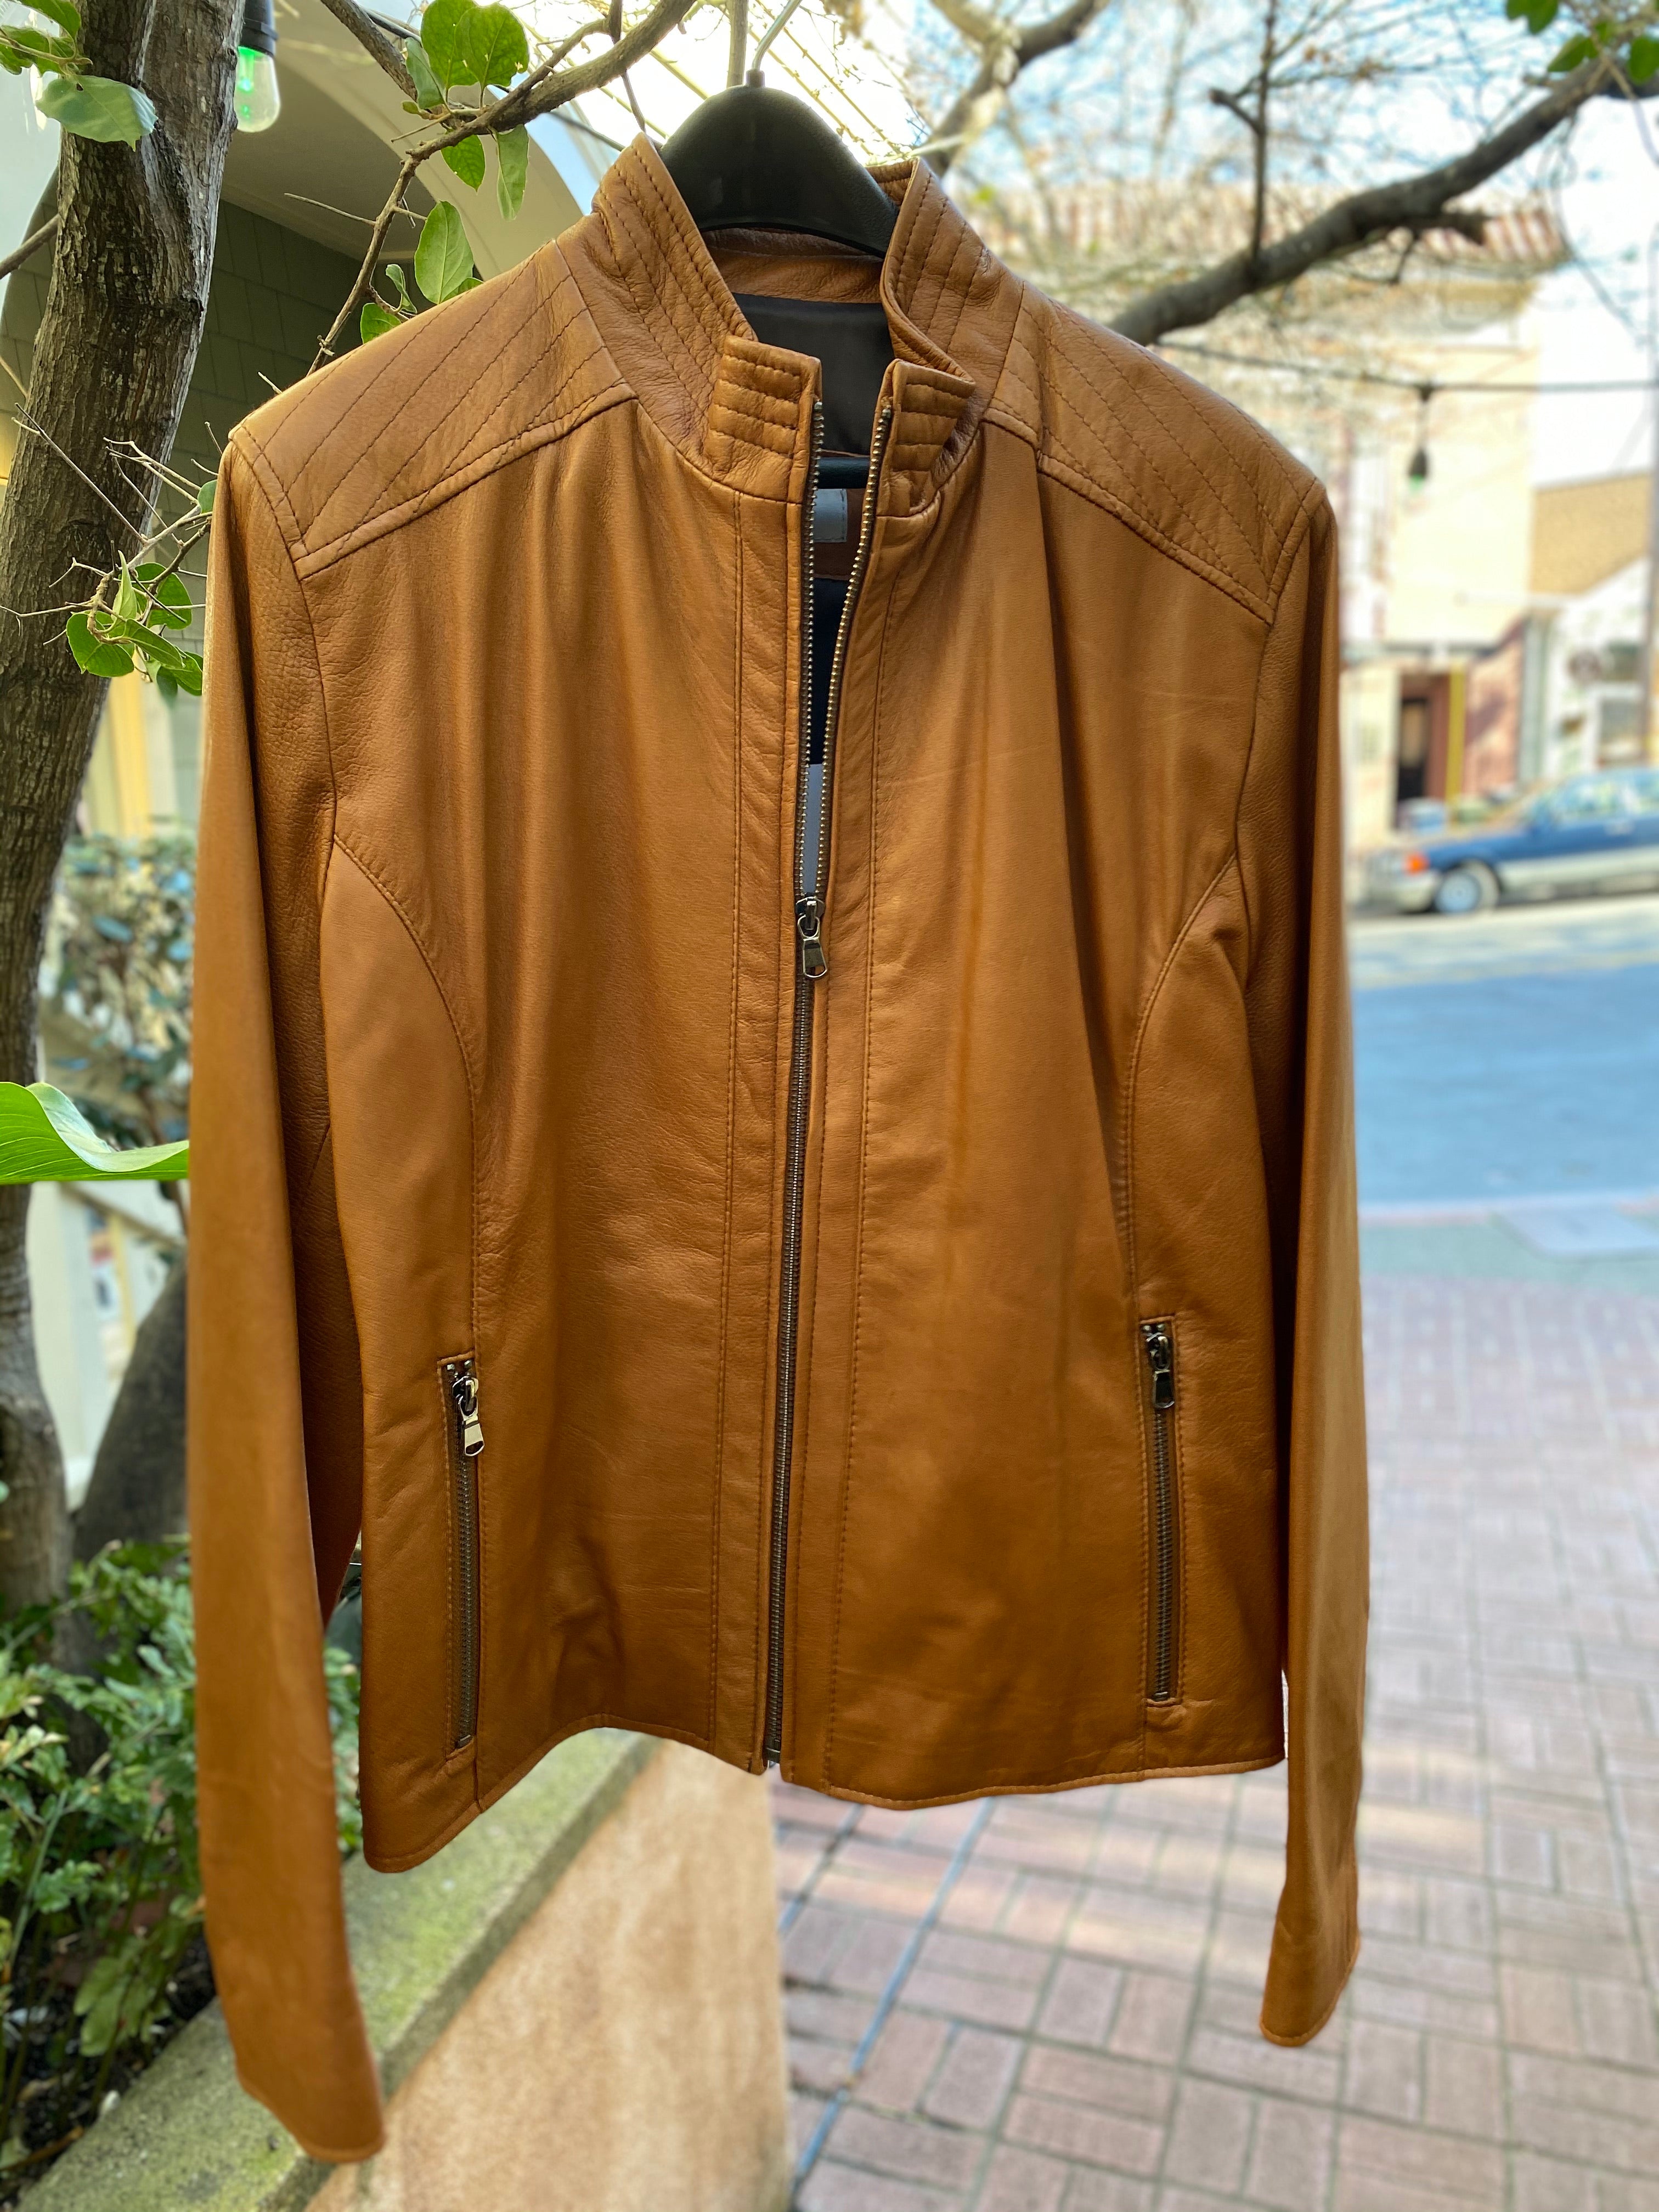 Women’s Brown Leather Jacket